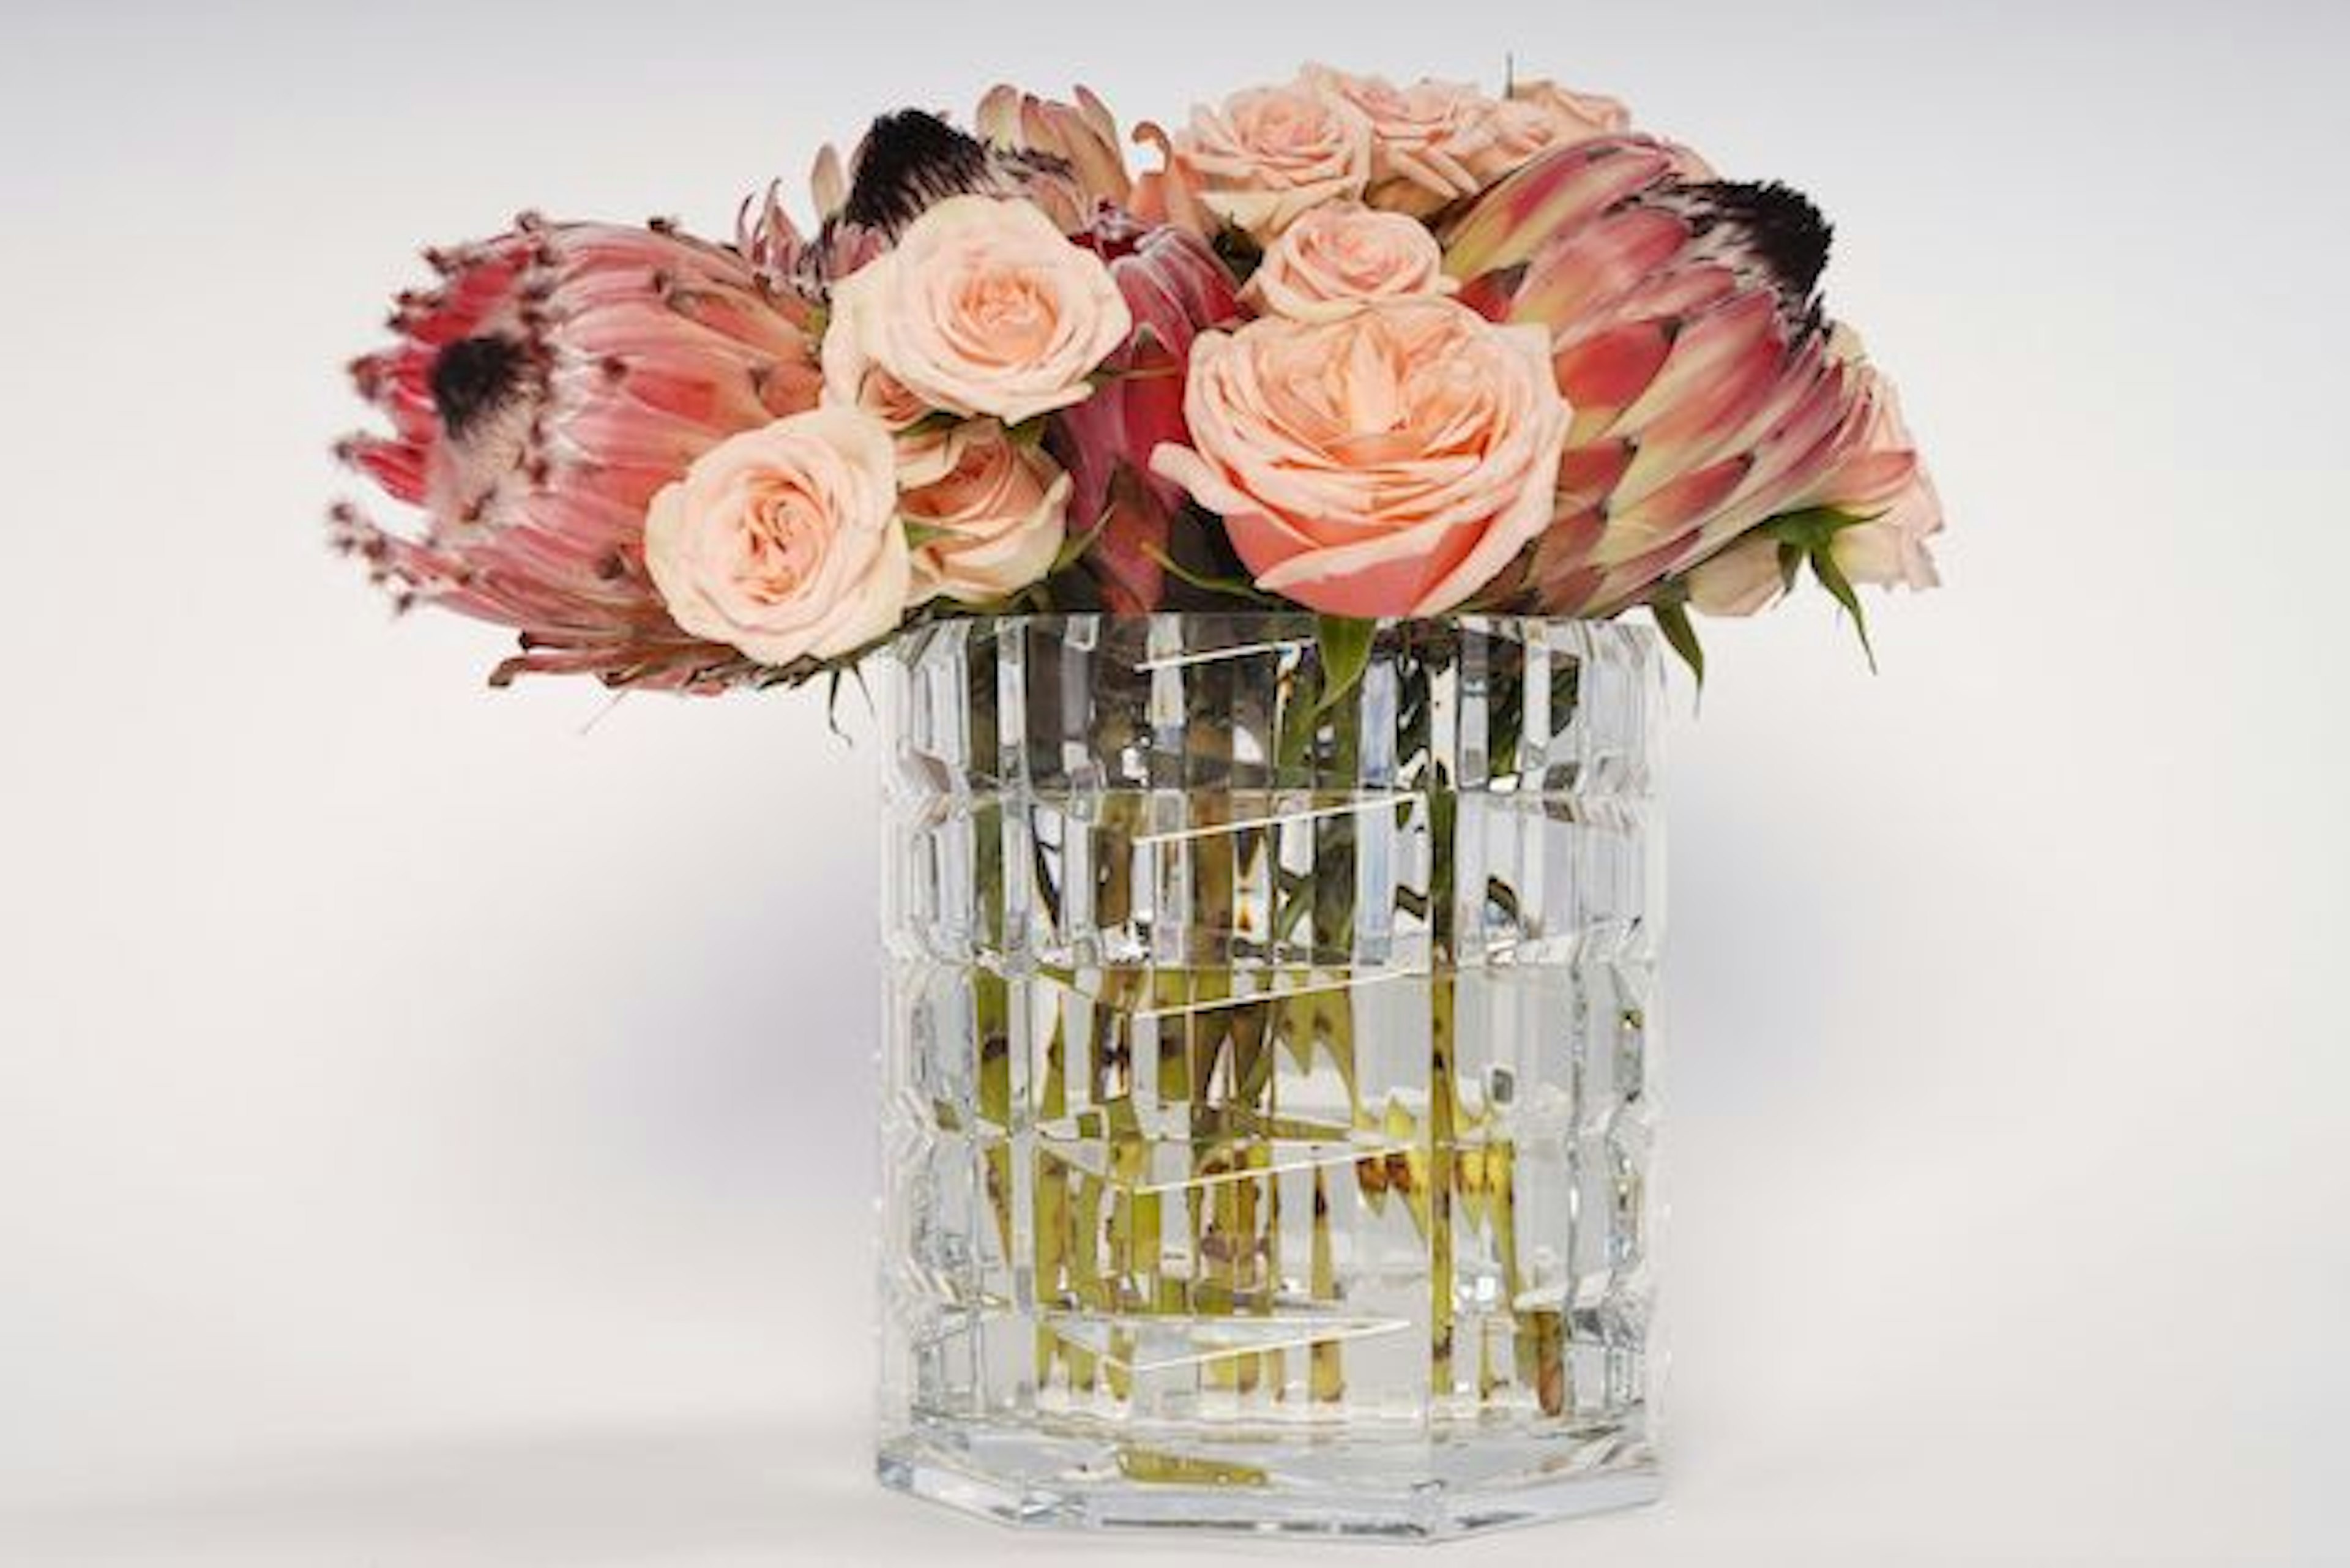 Flowers for Large, Medium & Small Vases